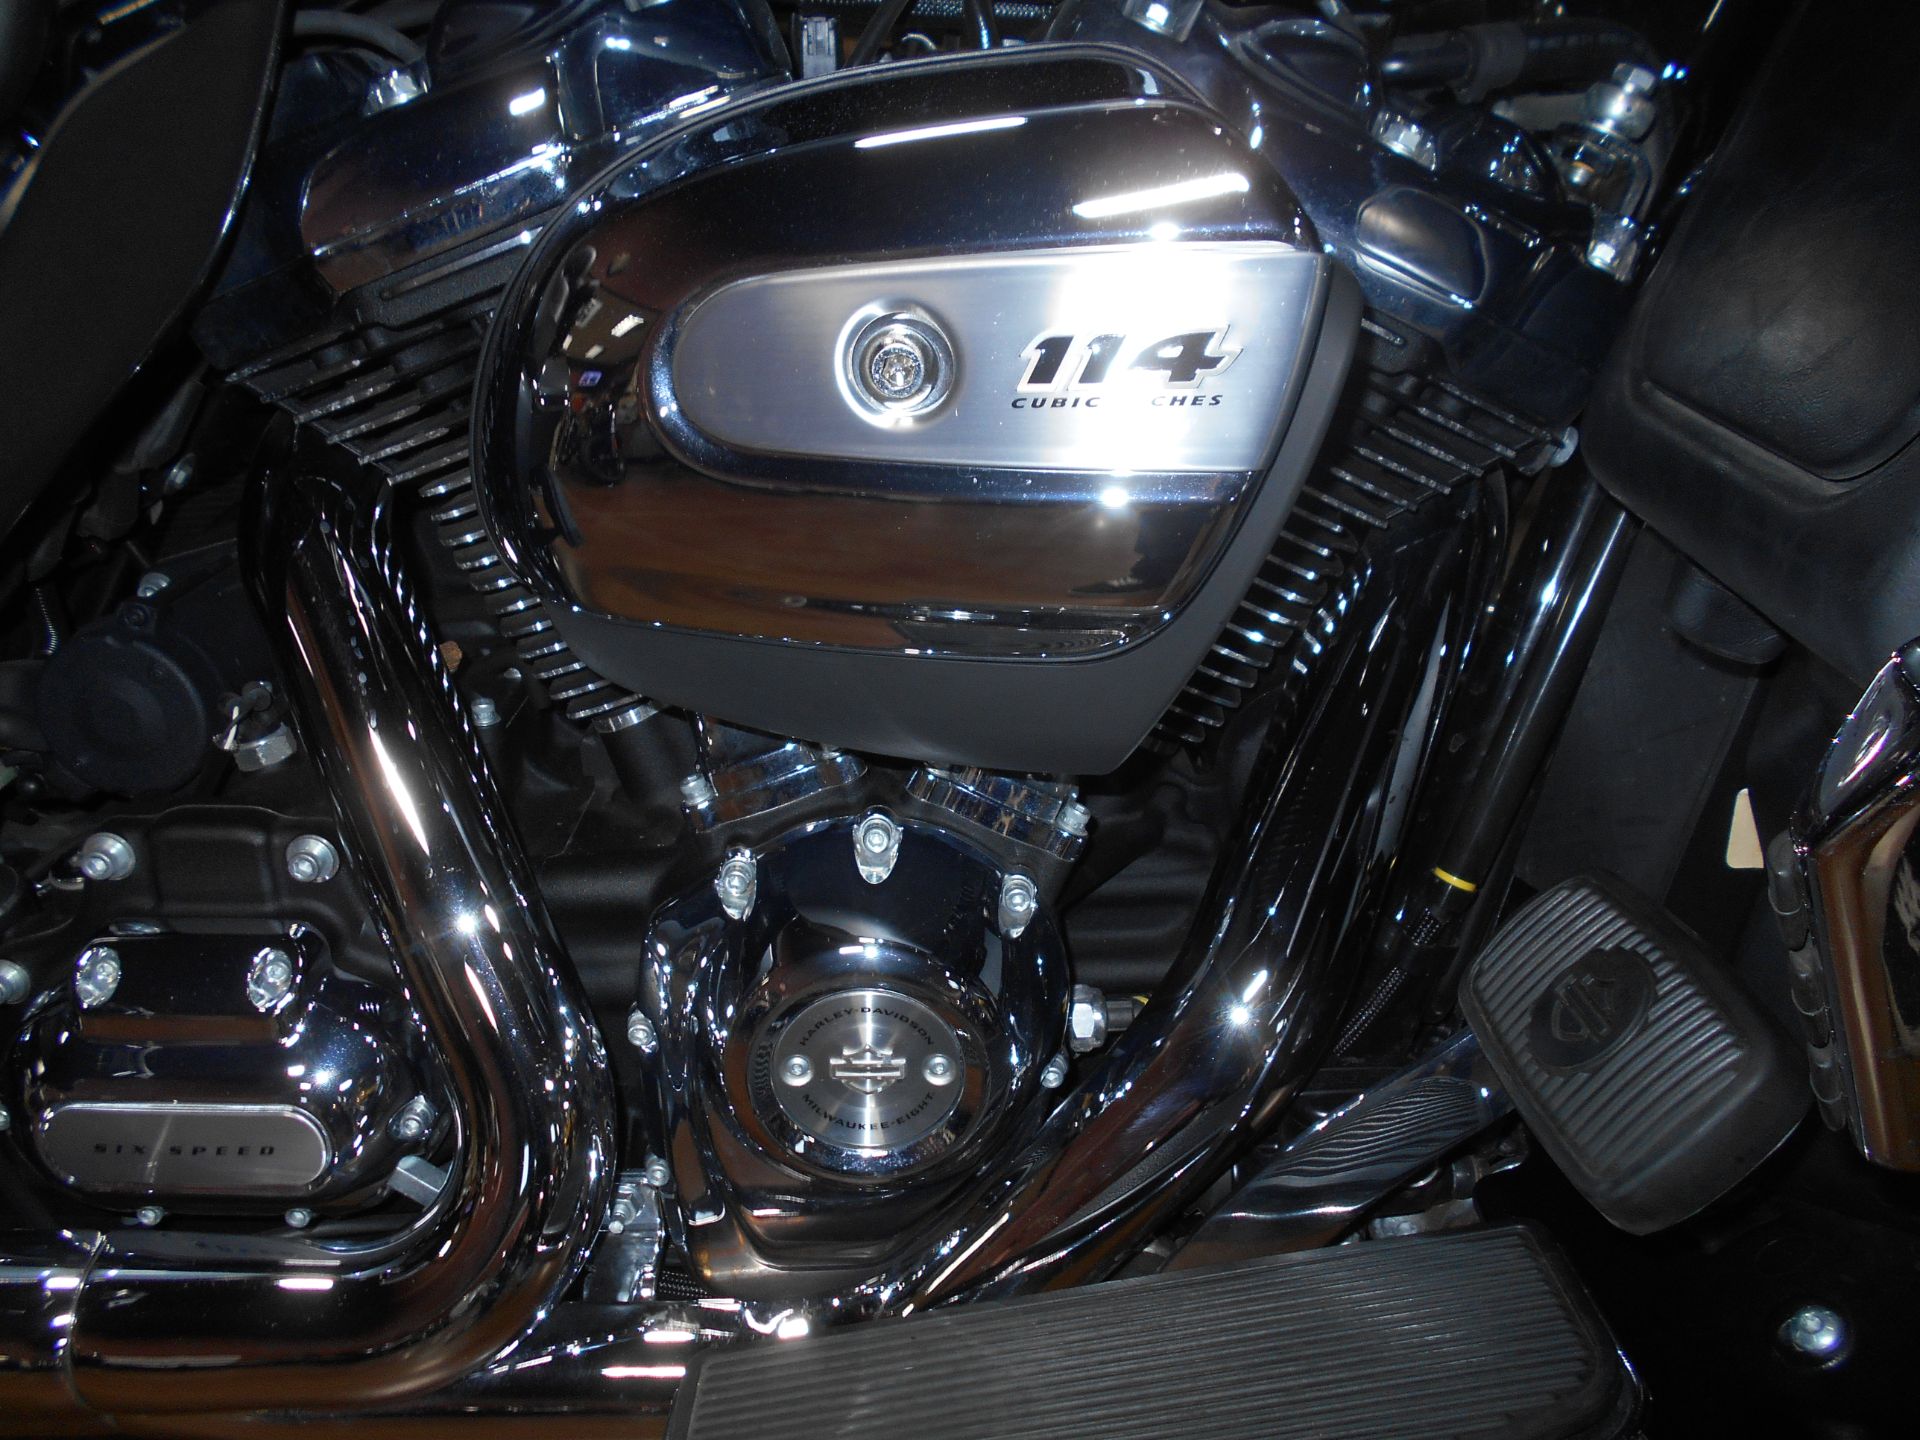 2021 Harley-Davidson Ultra Limited in Mauston, Wisconsin - Photo 5